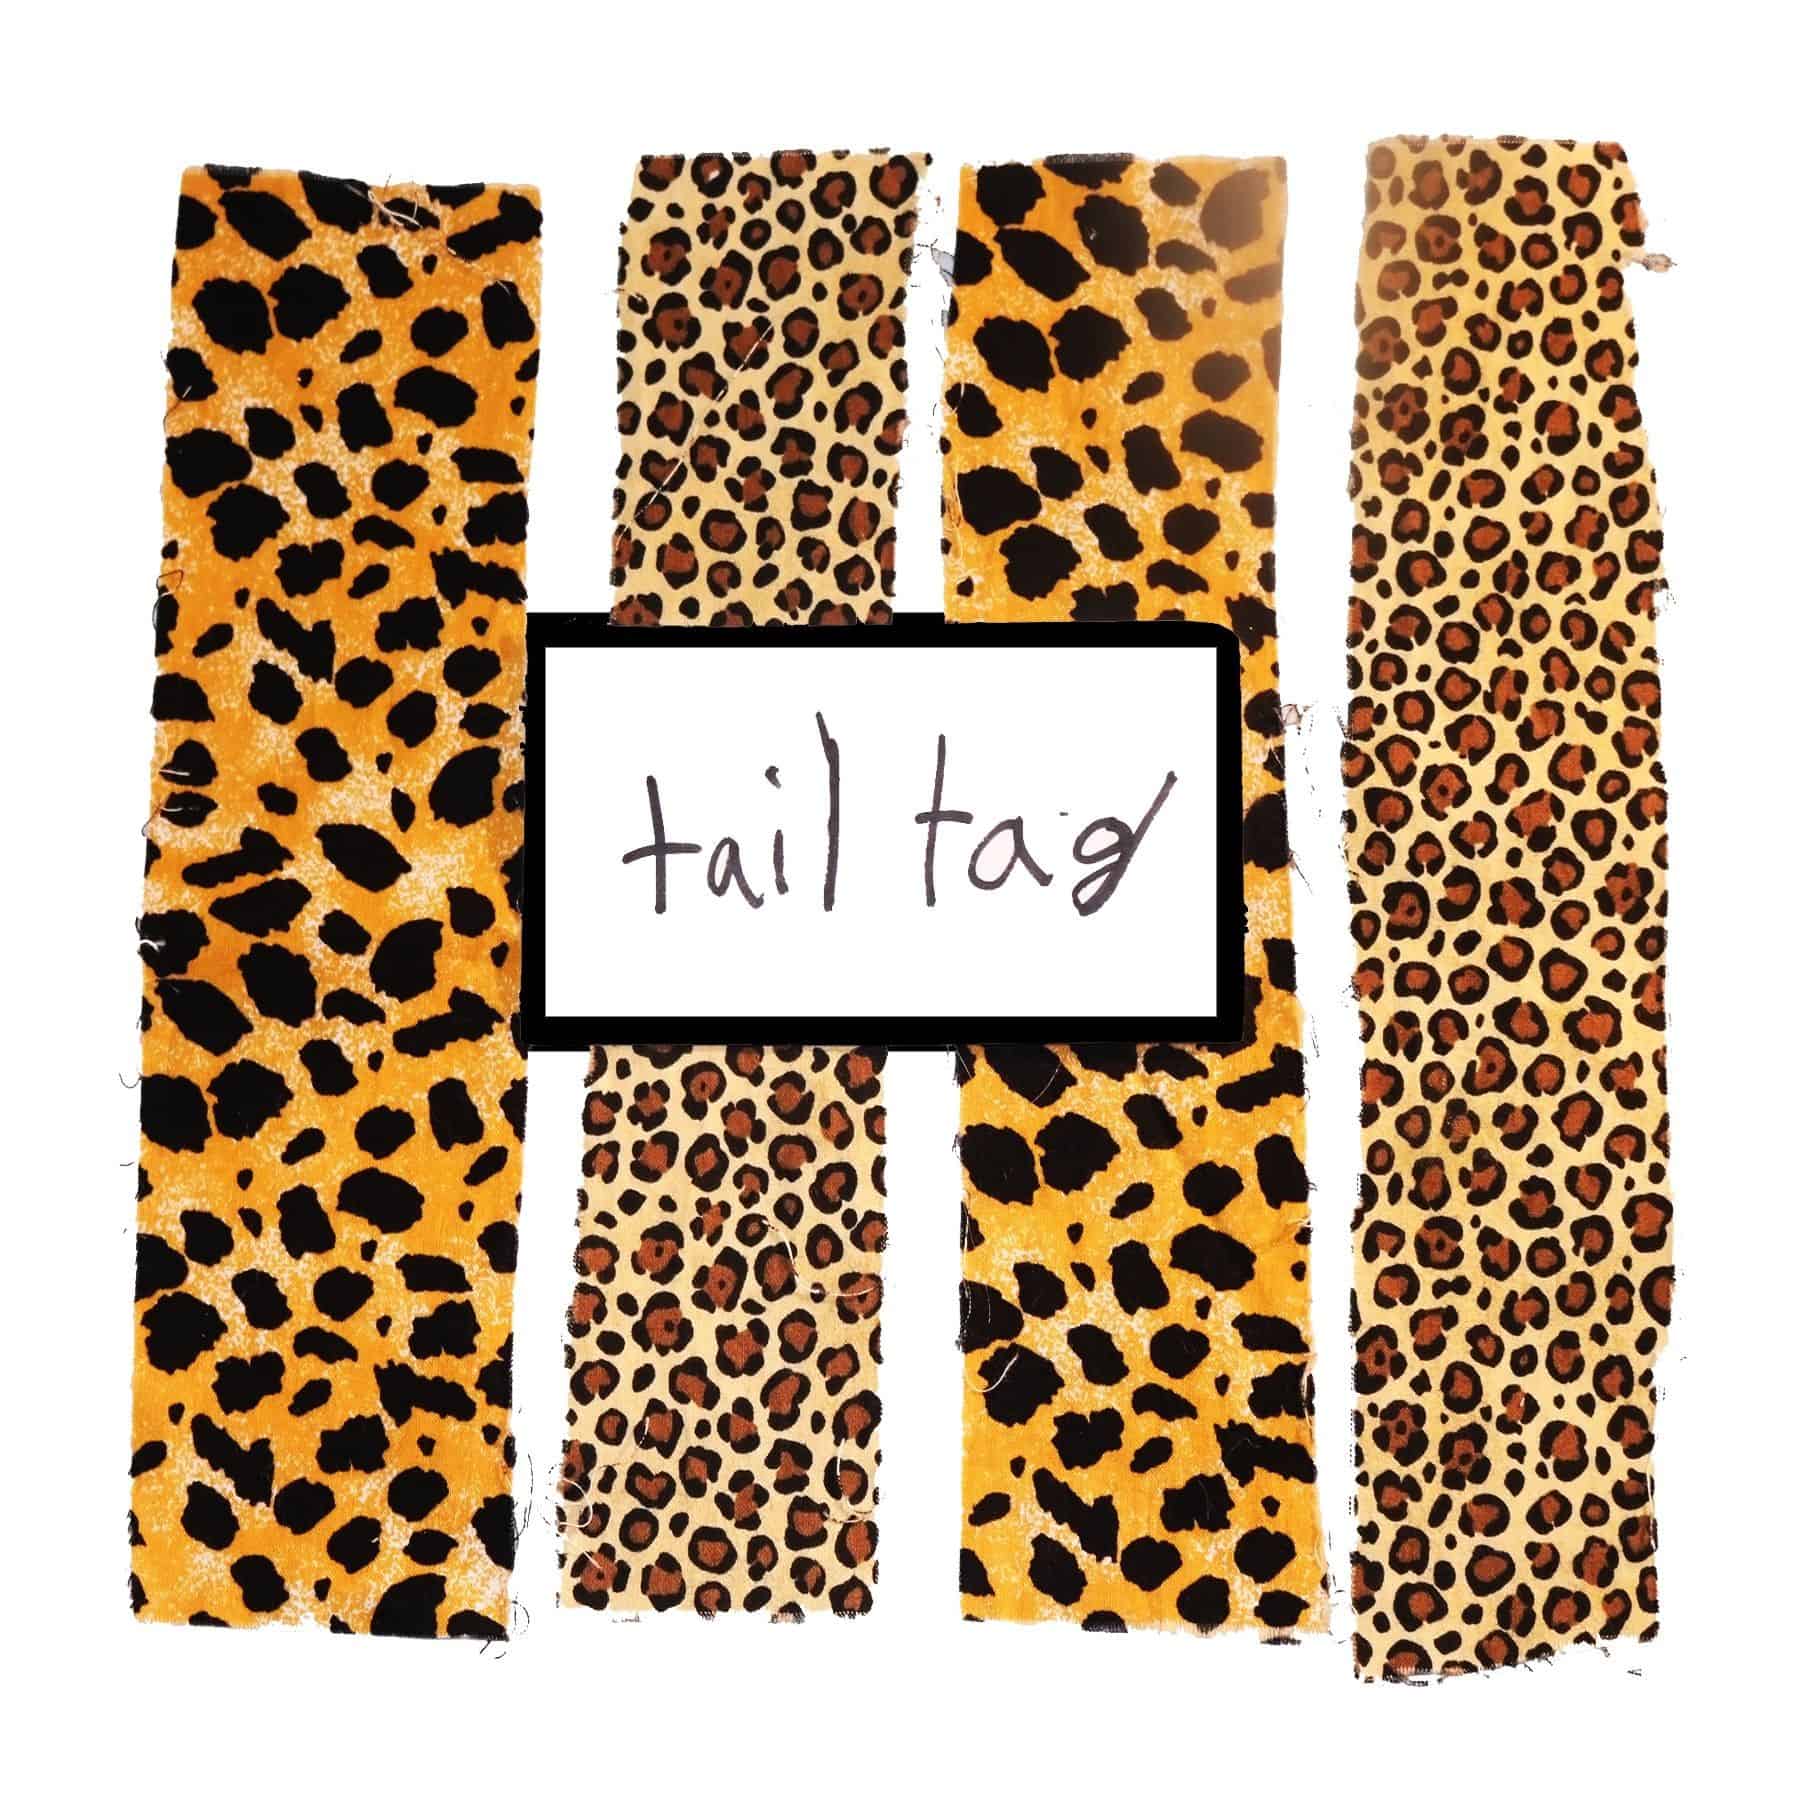 Make tails our of fabric strips and get the game started! A fun outdoor activity for everyone.